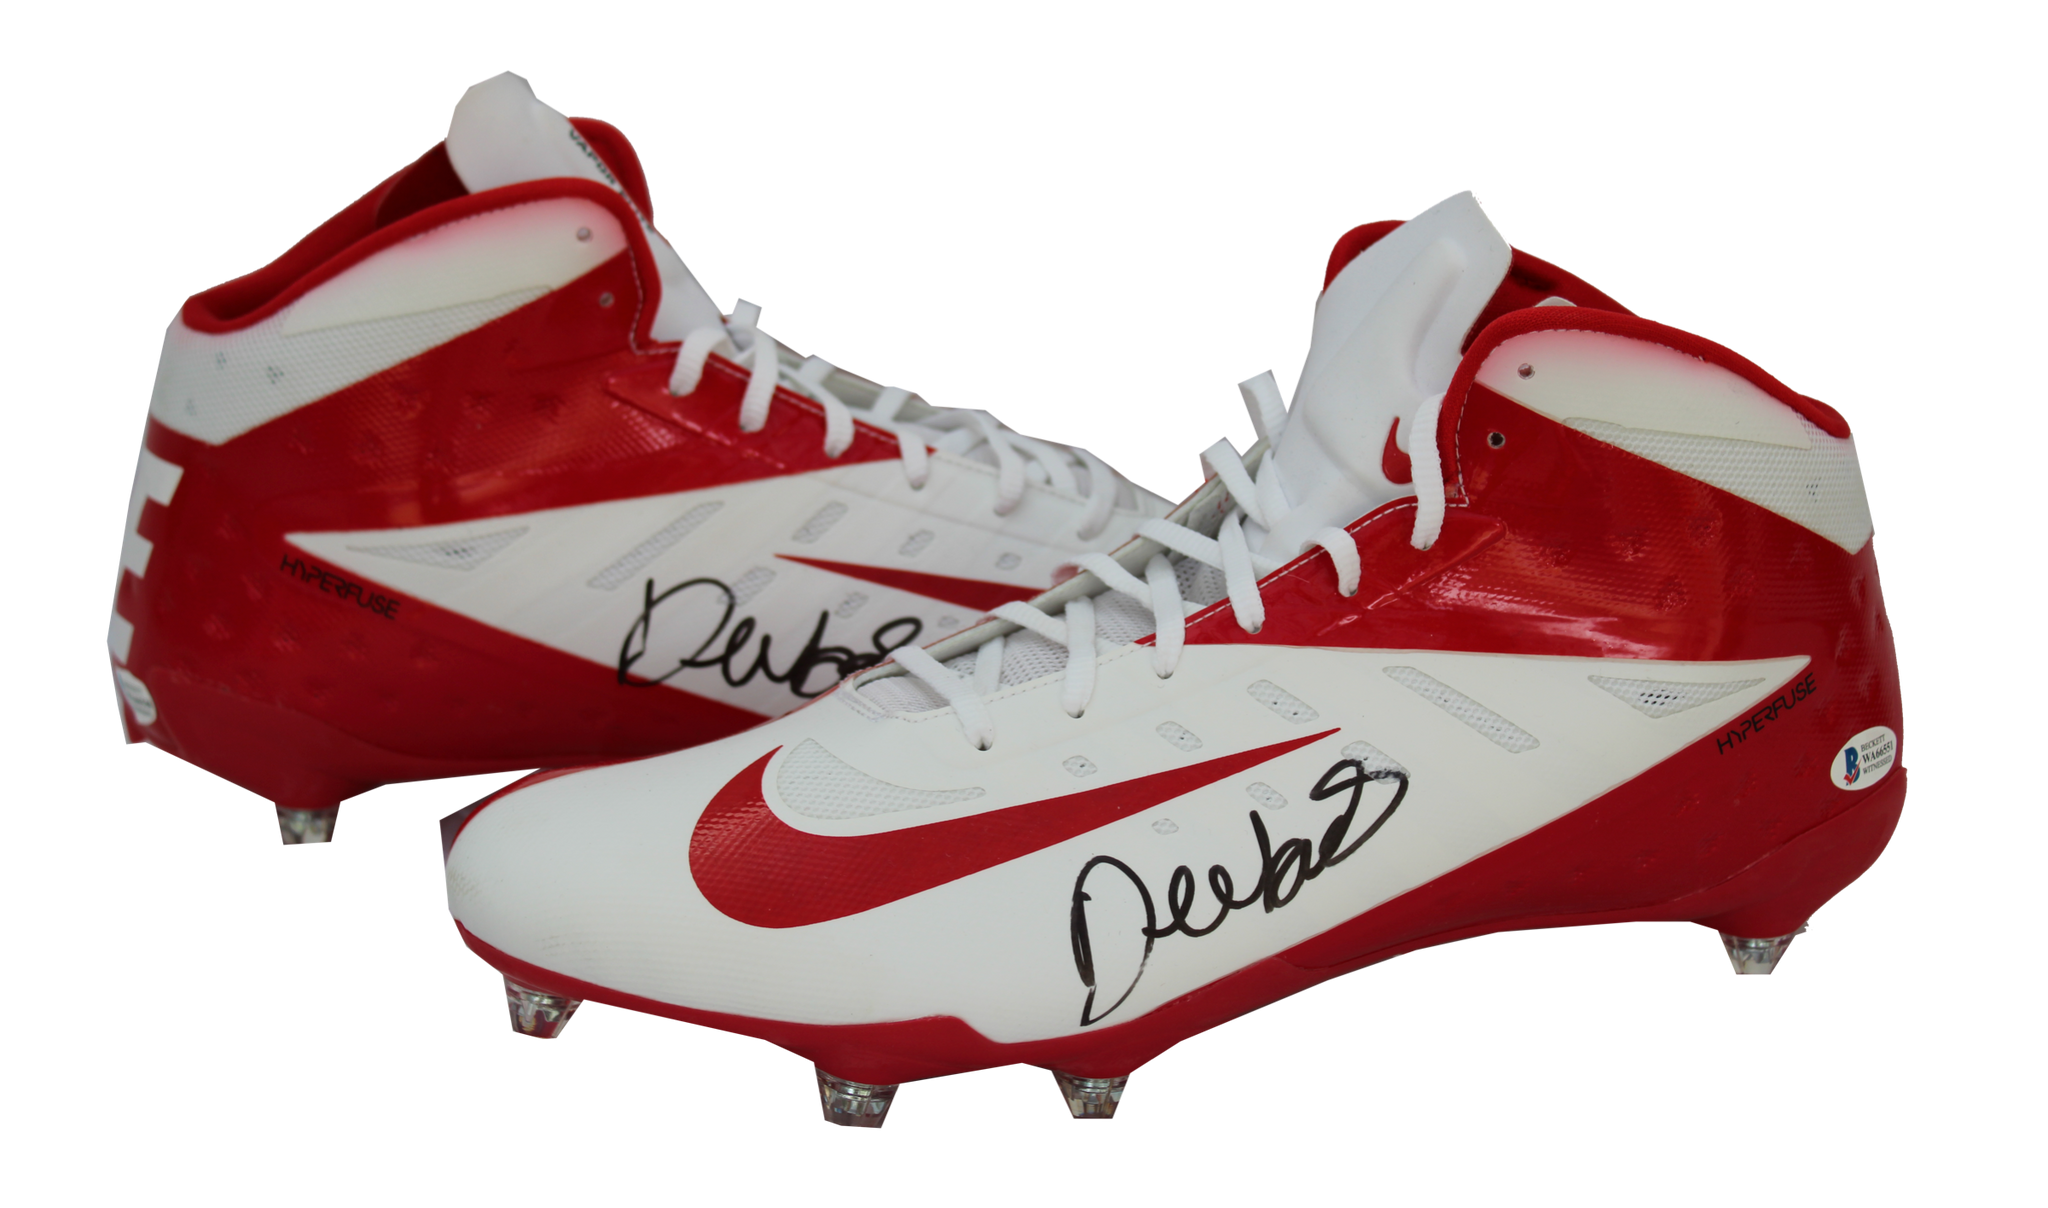 DEEBO SAMUEL 49ers GAME USED WORN CUSTOM Super Bowl 54 Gucci CLEATS  PHOTOMATCHED